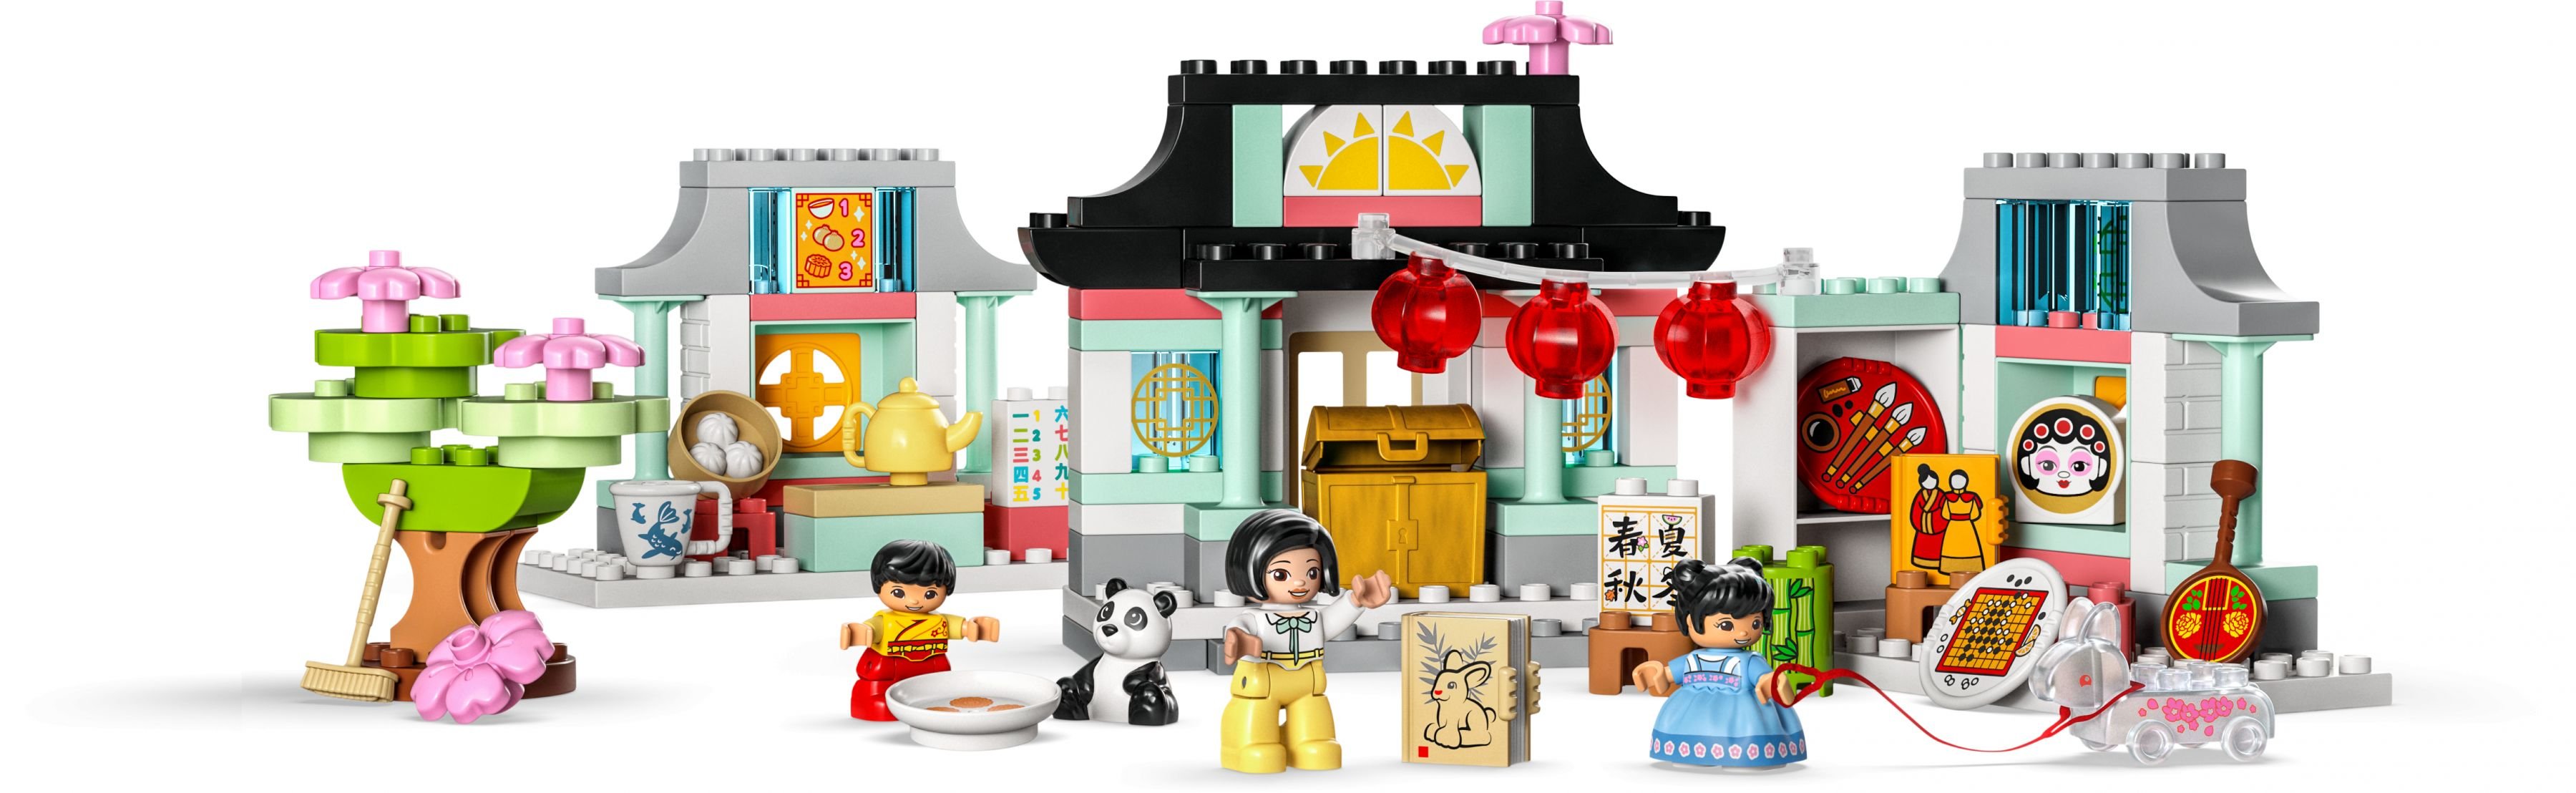 LEGO Duplo 10411 Learn about Chinese Culture LEGO_10411.jpg